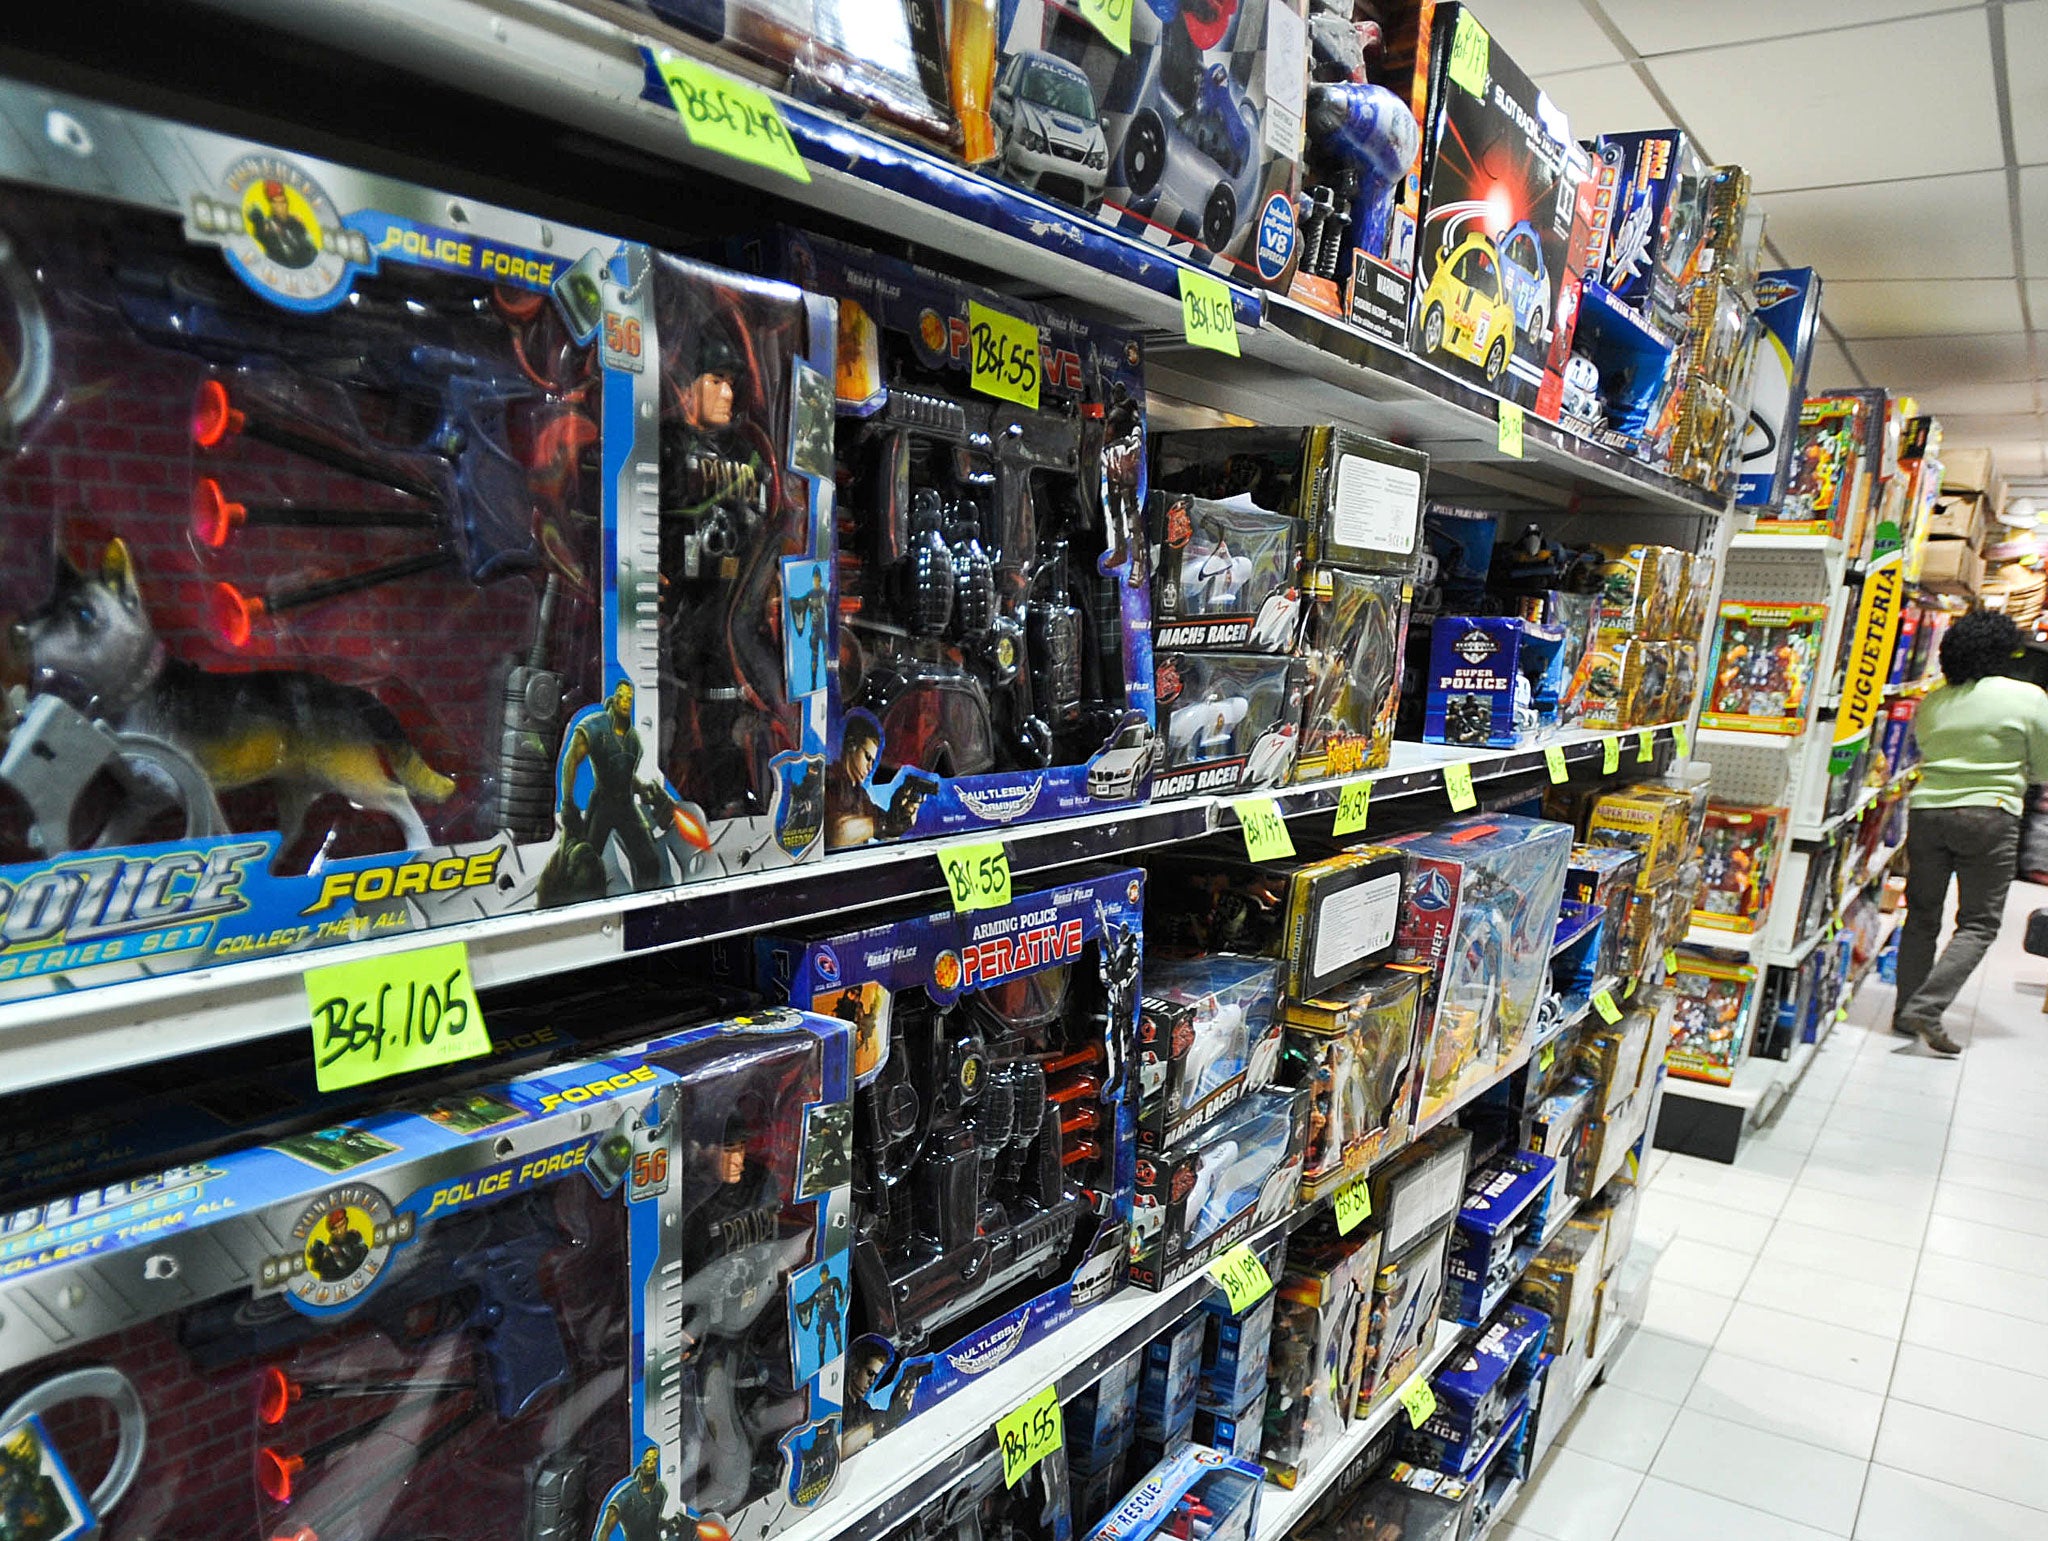 Toys are seen on the shelves of a toy store